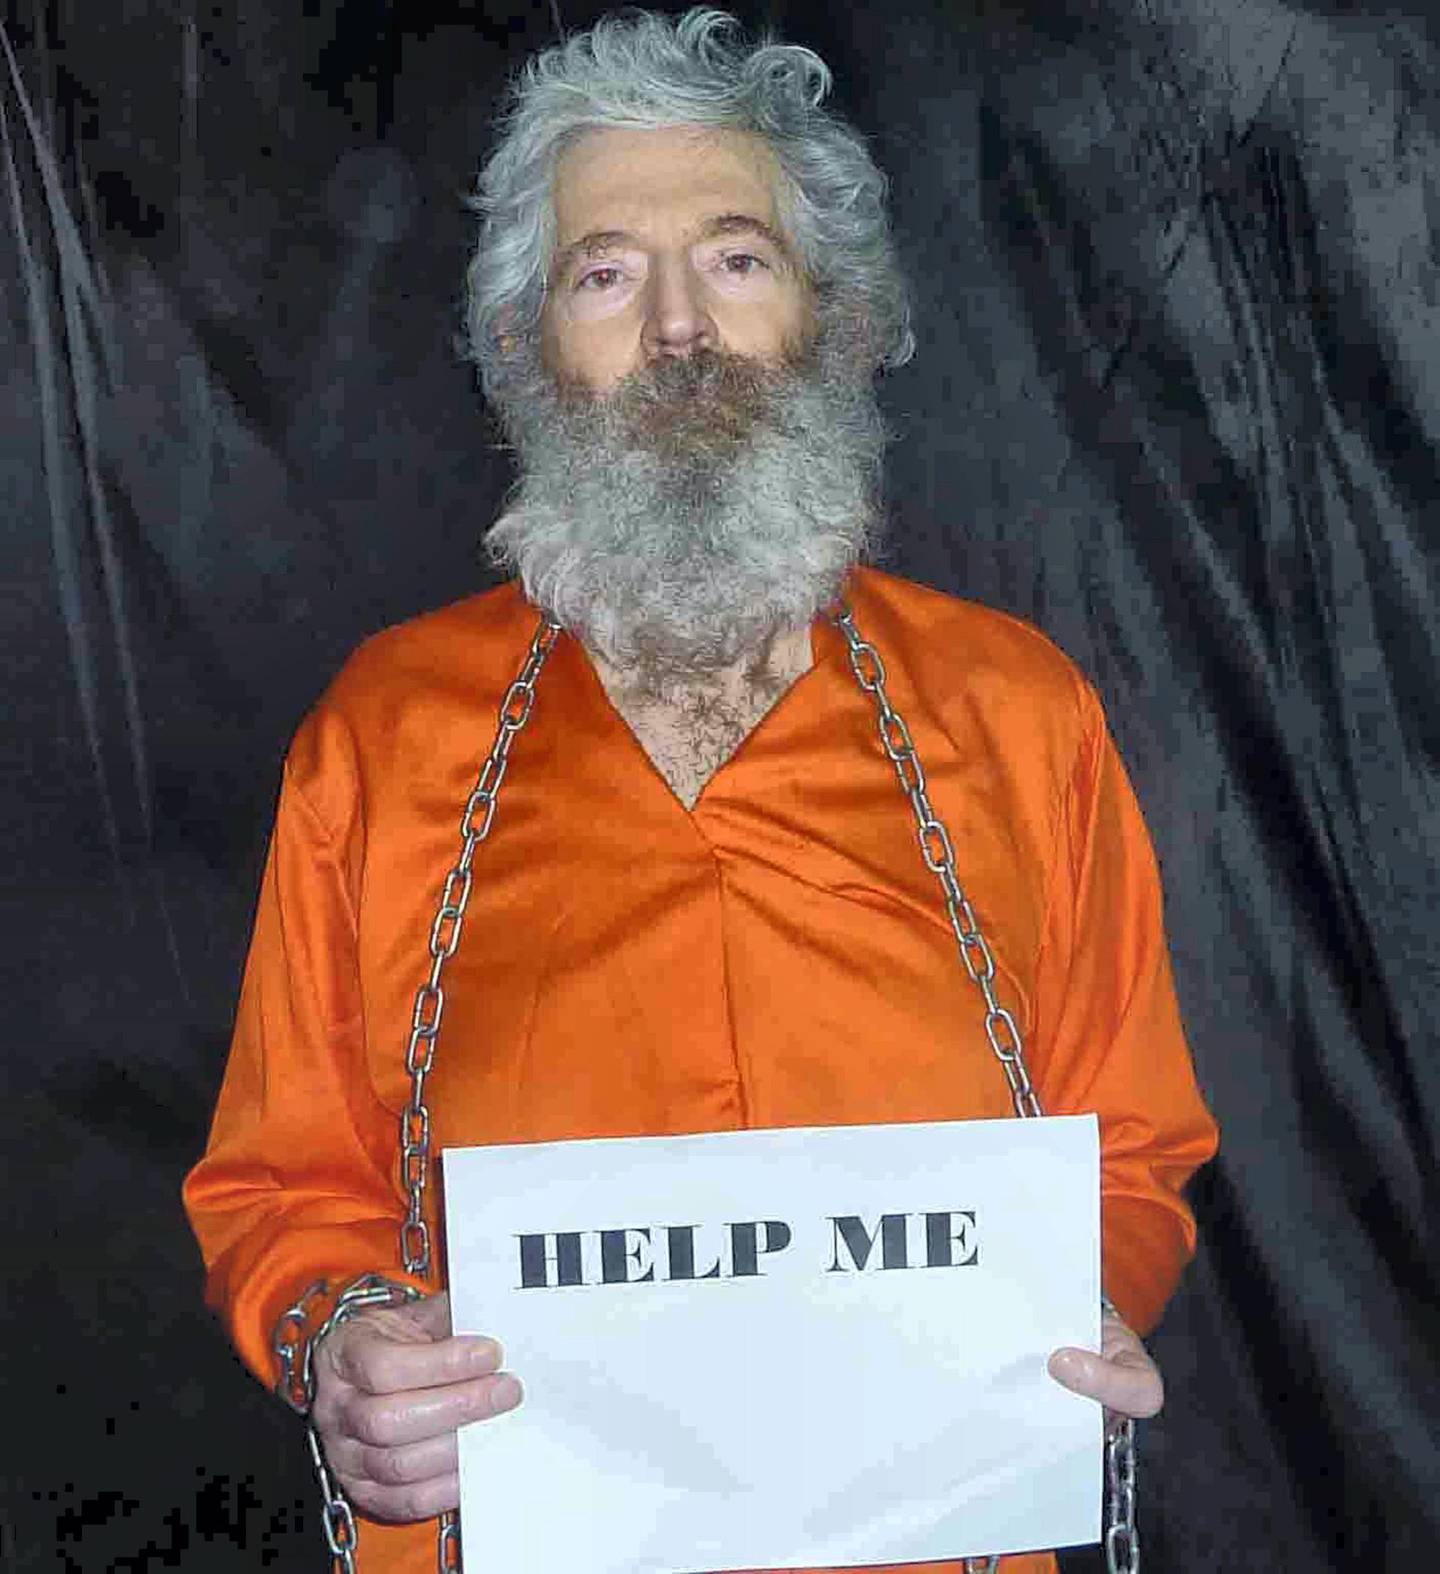 This Image provided by the Federal Bureau of Investigation(FBI) shows a photo of former FBI agent Robert Levinson, who went missing on Kish Island, Iran, on March 9, 2007, shackled and holding a sign. The United States announced a $5 million increased reward March 9, 2015 for information leading to the return of Levinson, as it marked the eighth anniversary of his mysterious disappearance in Iran. The FBI had previously issued a $1 million reward for Levinson's return in 2012, five years after he went missing.    AFP PHOTO / HANDOUT / FBI                         == RESTRICTED TO EDITORIAL USE / MANDATORY CREDIT: "AFP PHOTO / HANDOUT / FBI "/ NO MARKETING / NO ADVERTISING CAMPAIGNS / NO A LA CARTE SALES / DISTRIBUTED AS A SERVICE TO CLIENTS == (Photo by -- / FBI / AFP)